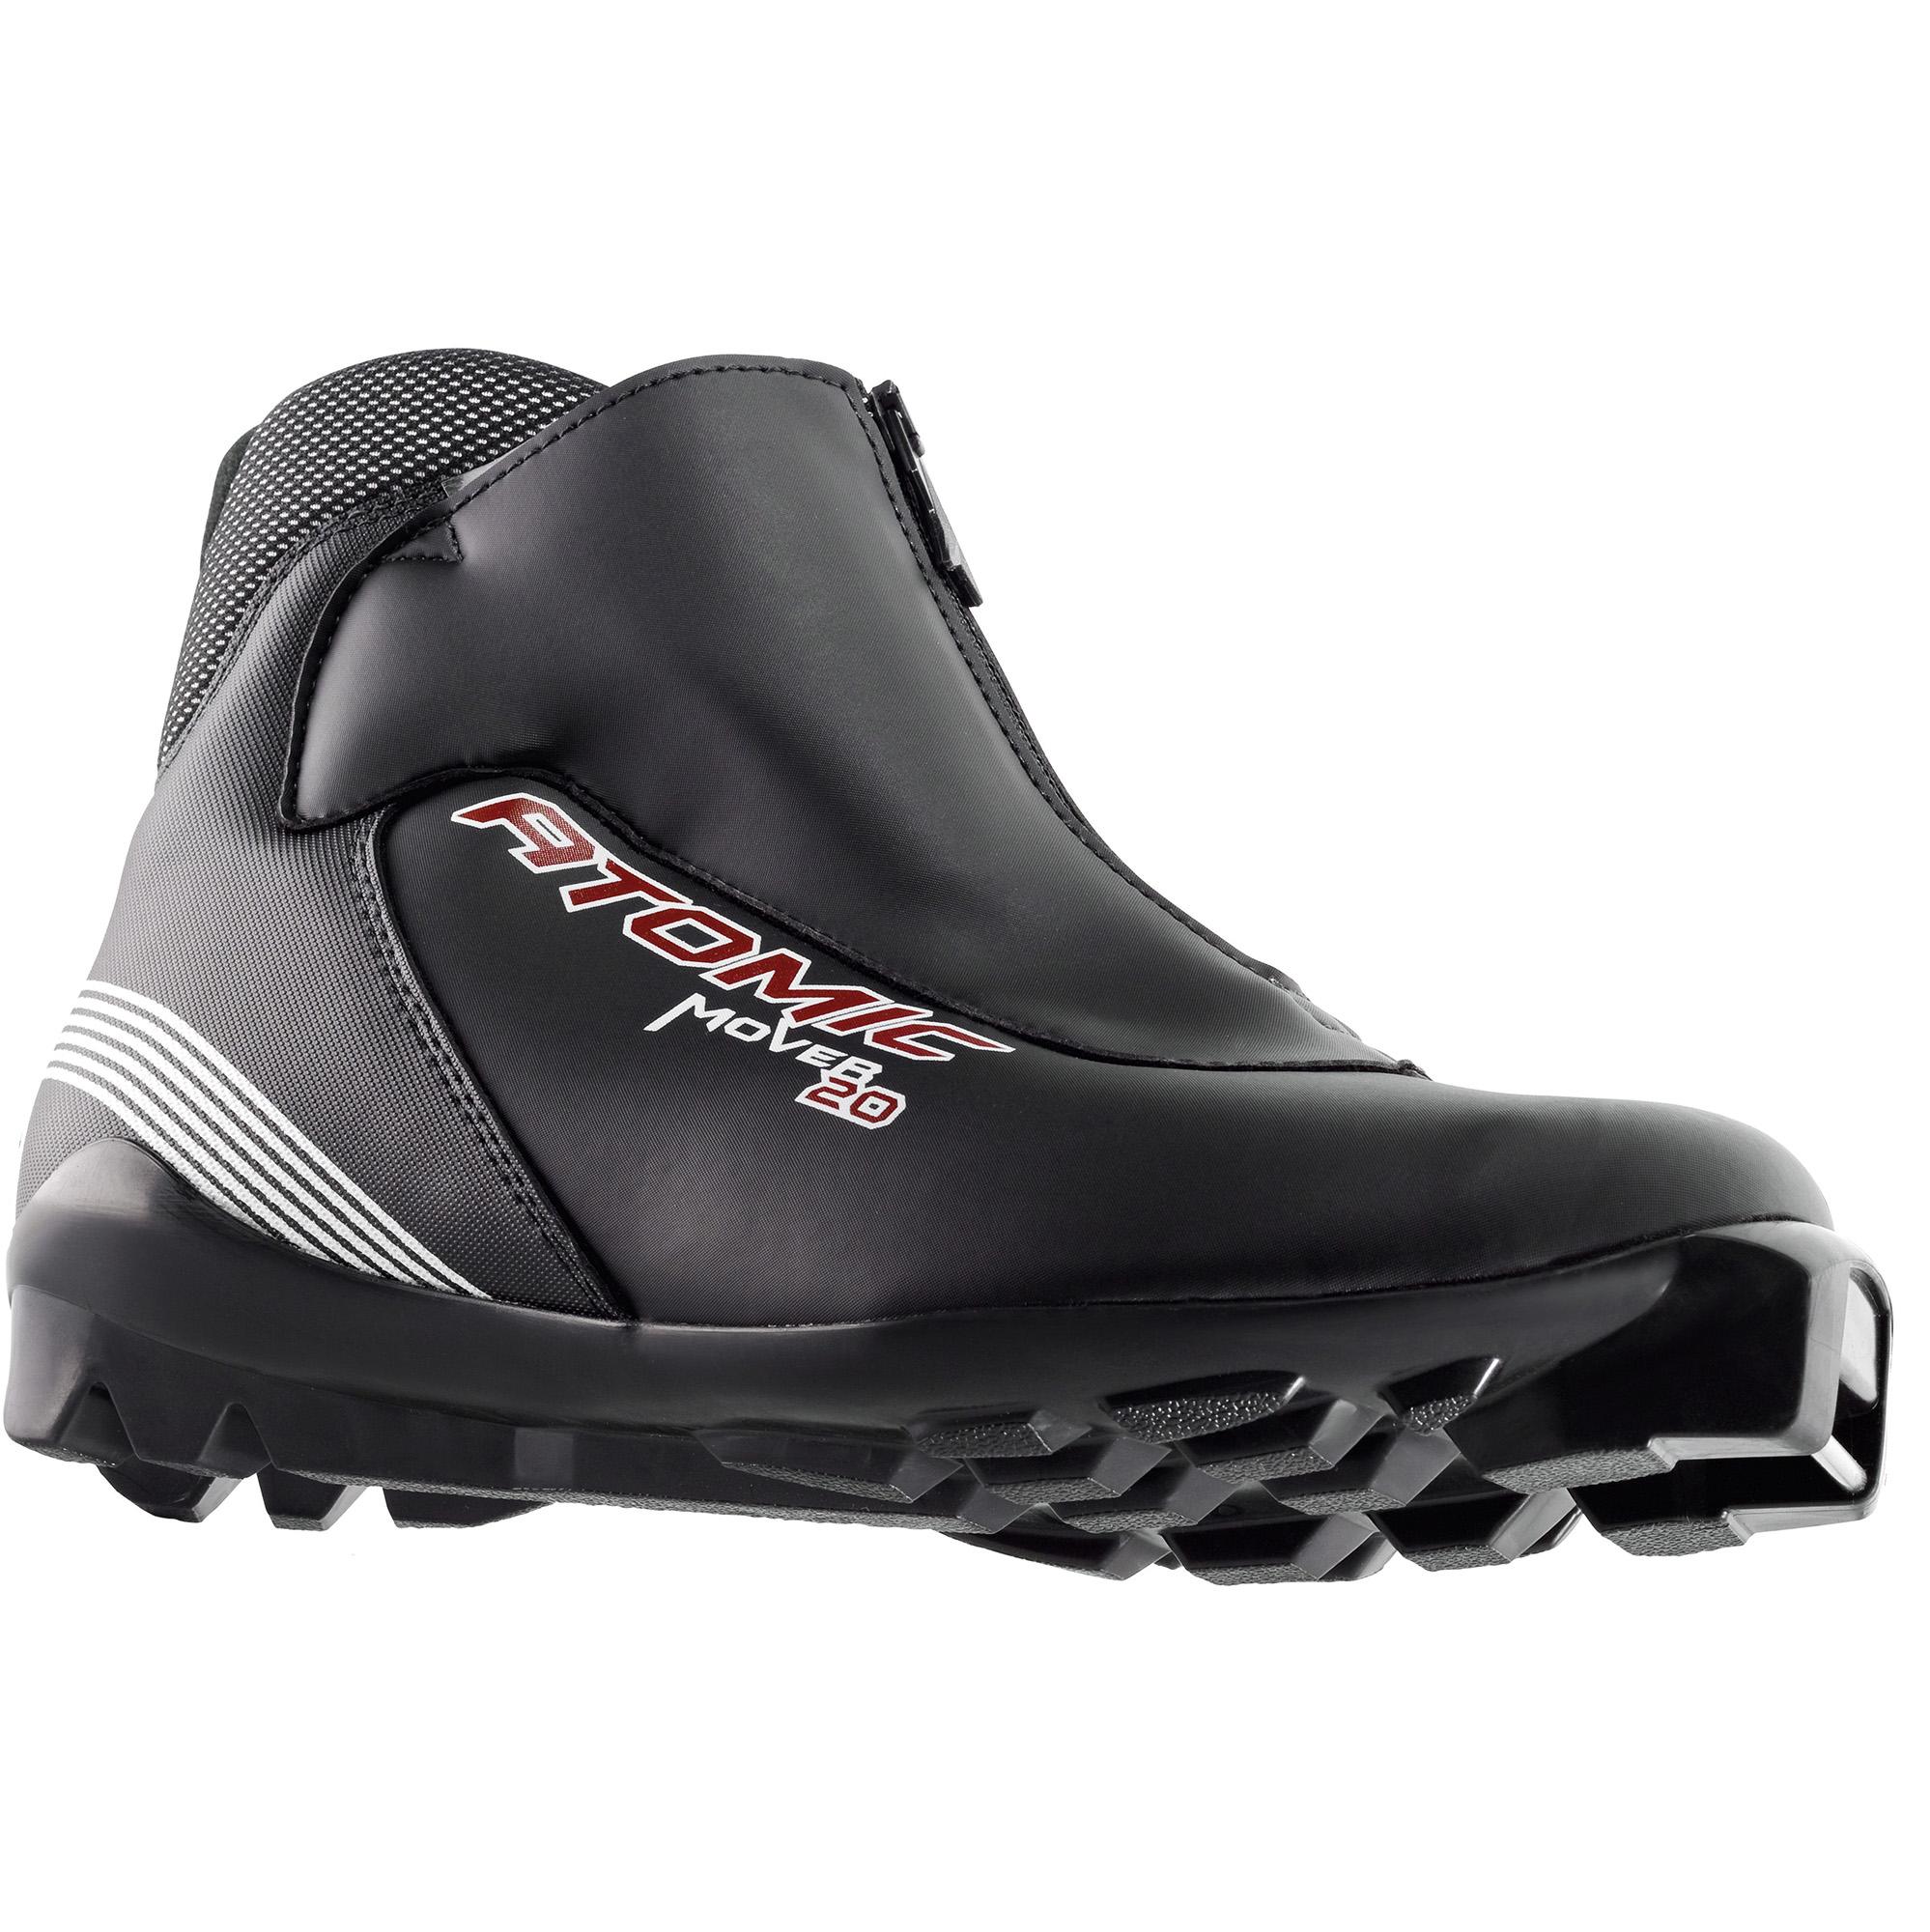 Atomic Mover 20 SNS nordic ski boots